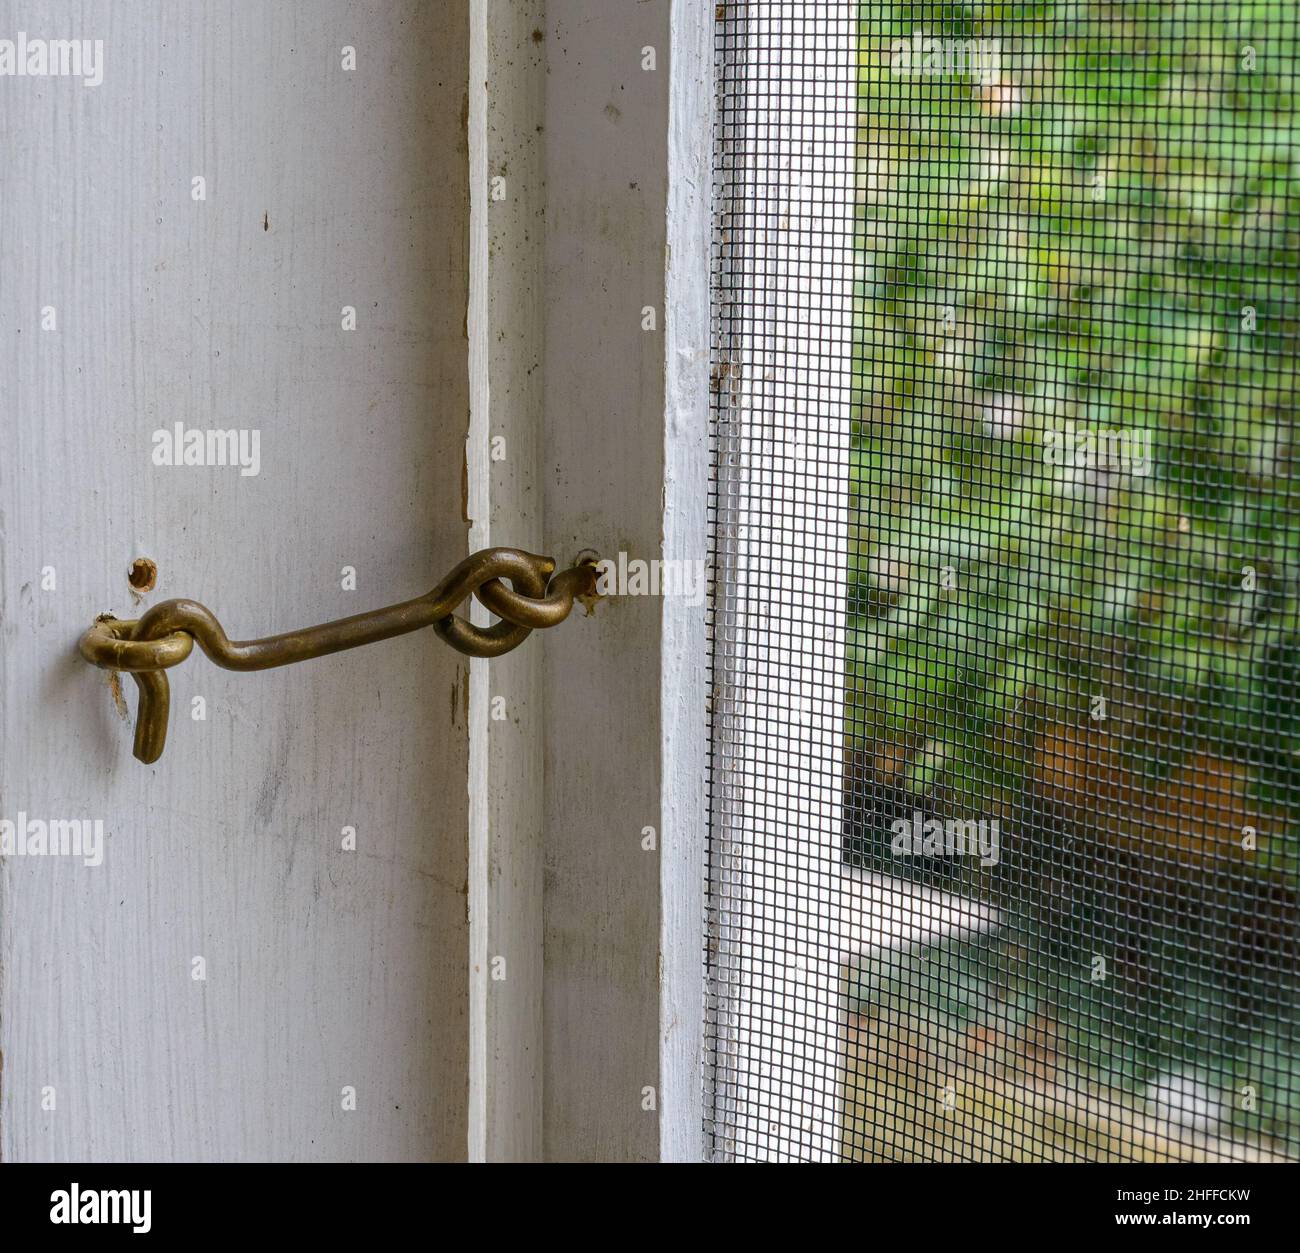 Screen door and attached hook latch with eye Stock Photo - Alamy